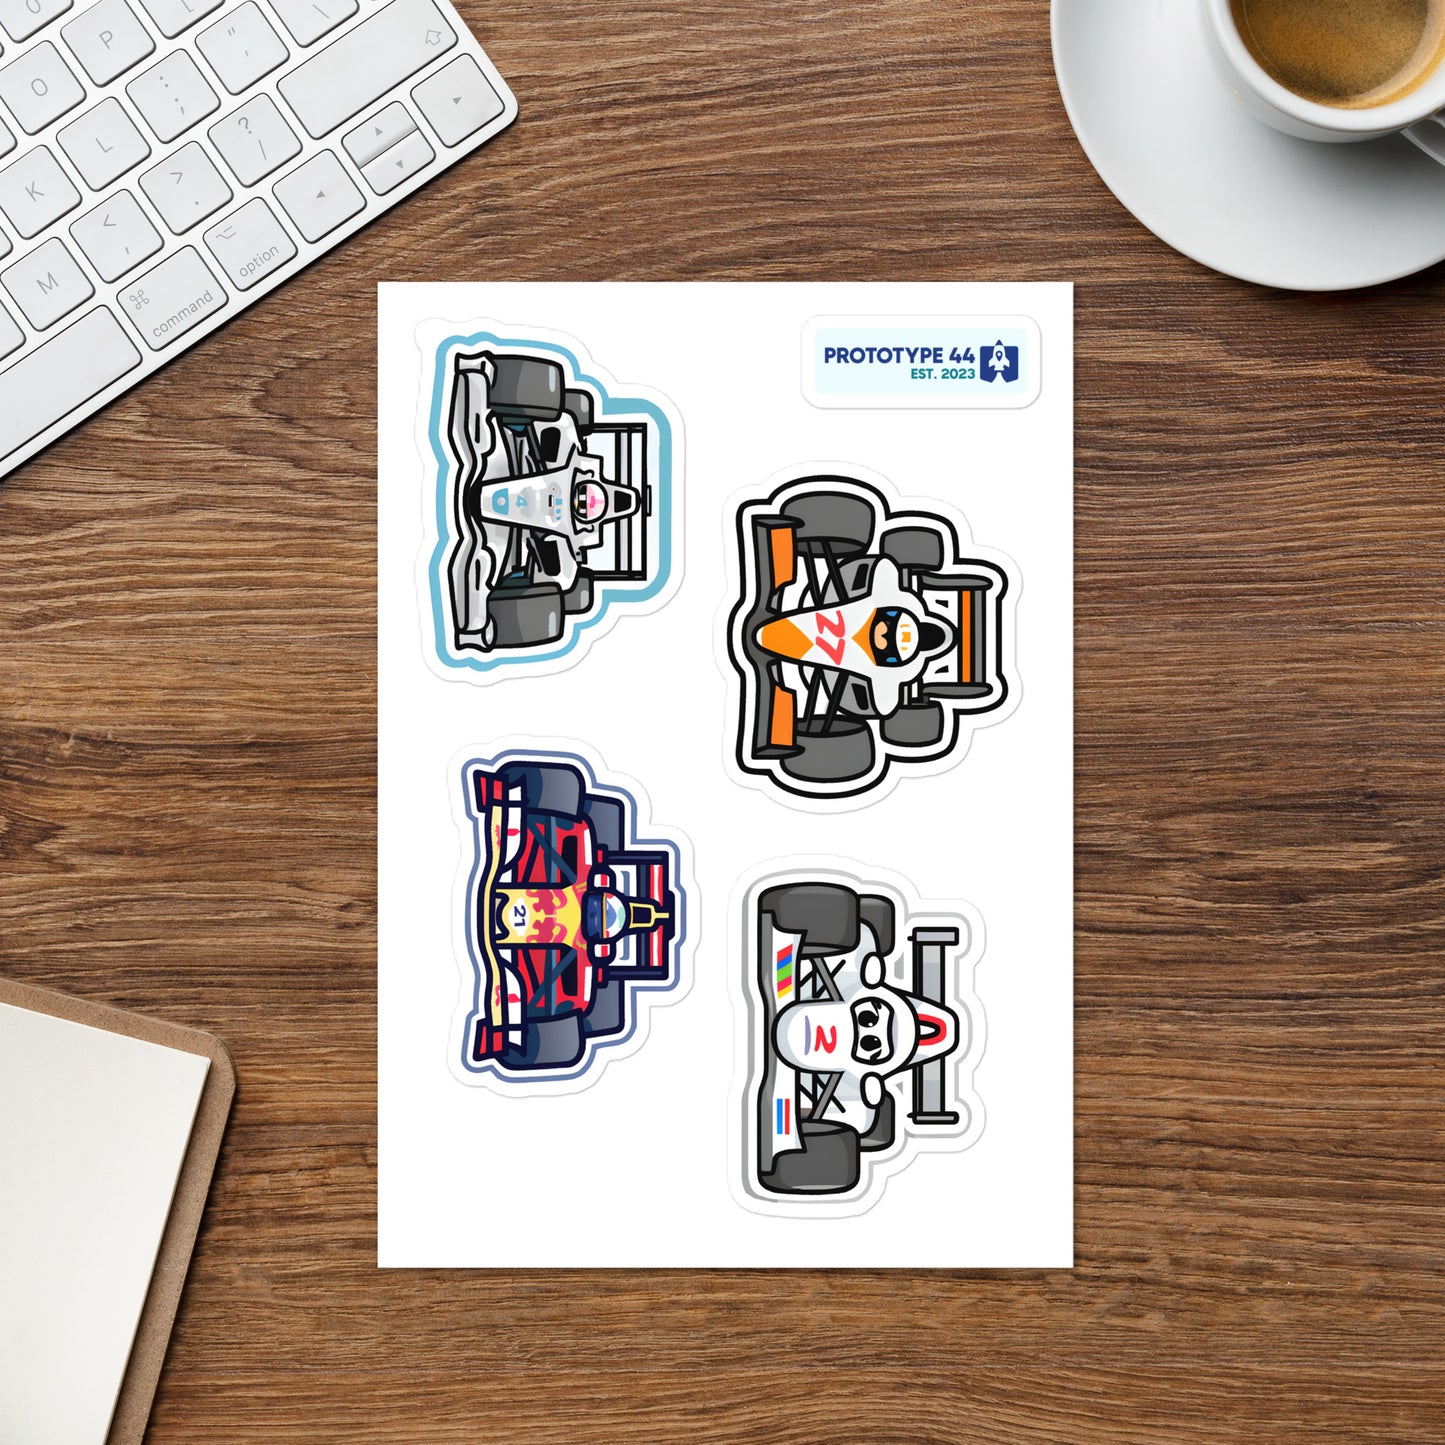 F1 sticker sheet on wood table with coffee cup, keyboard etc.